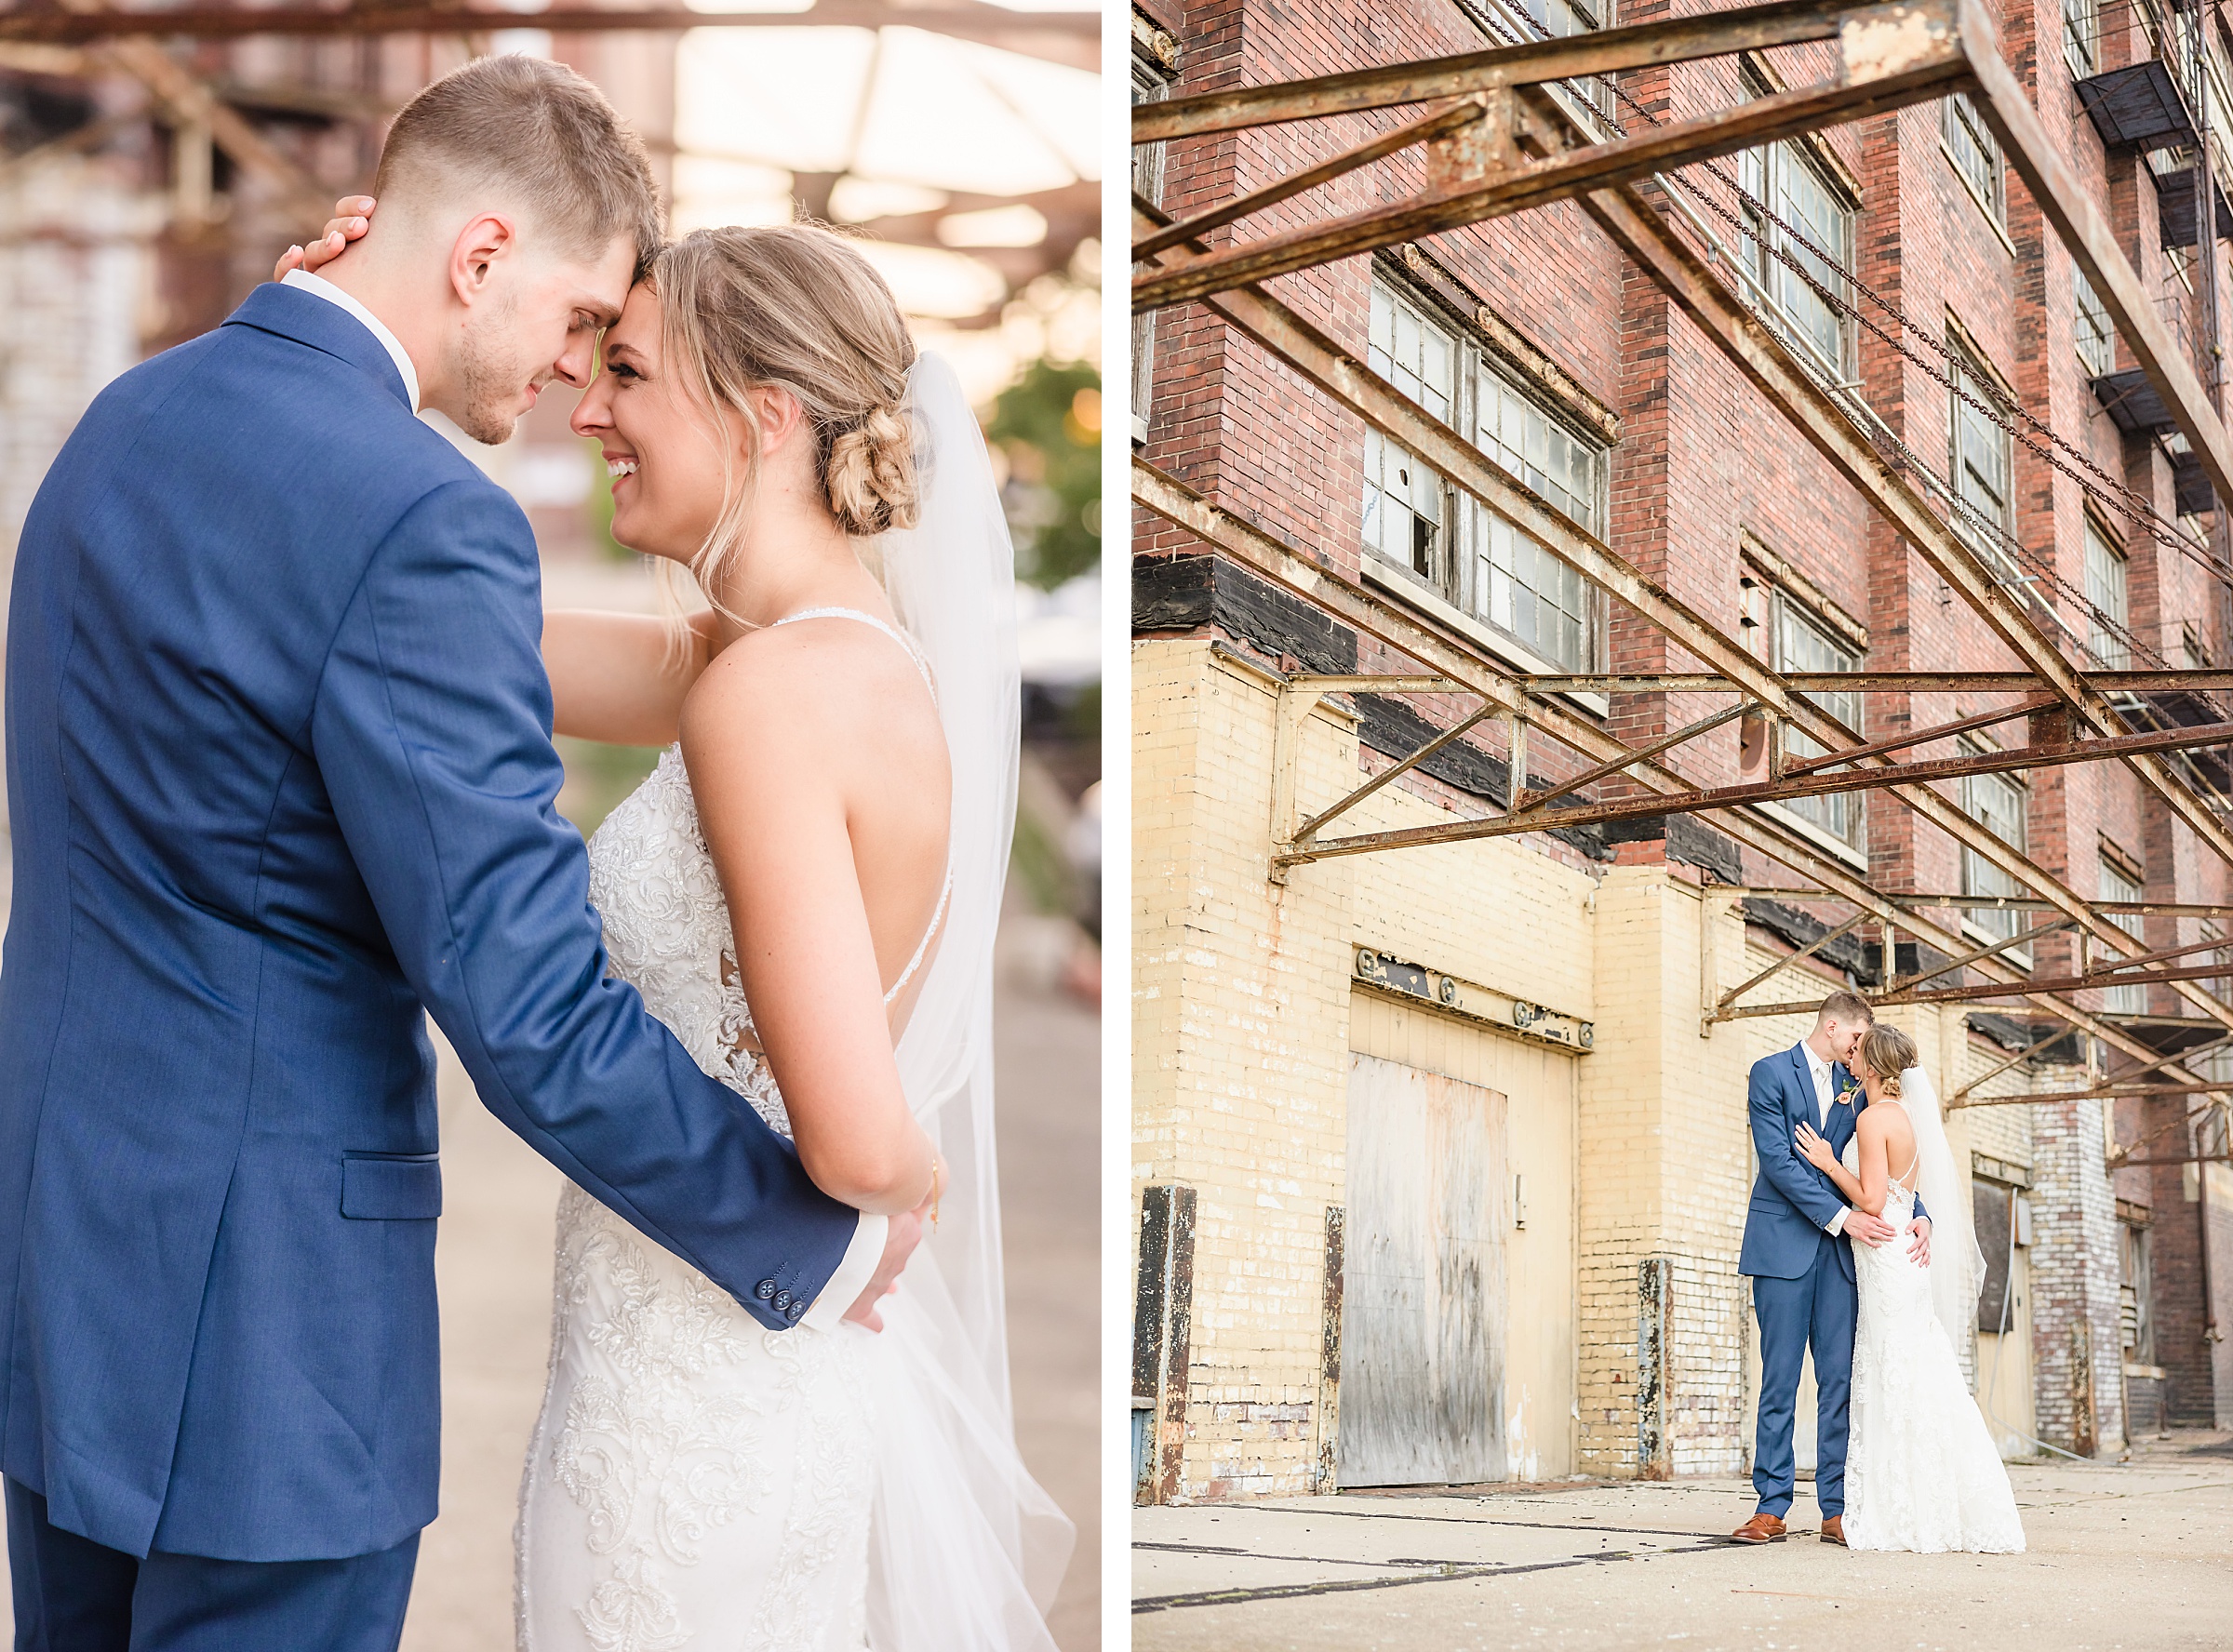 Bride and Groom embrace during their wedding at the Warehouse on State Street in Peoria, Illinois